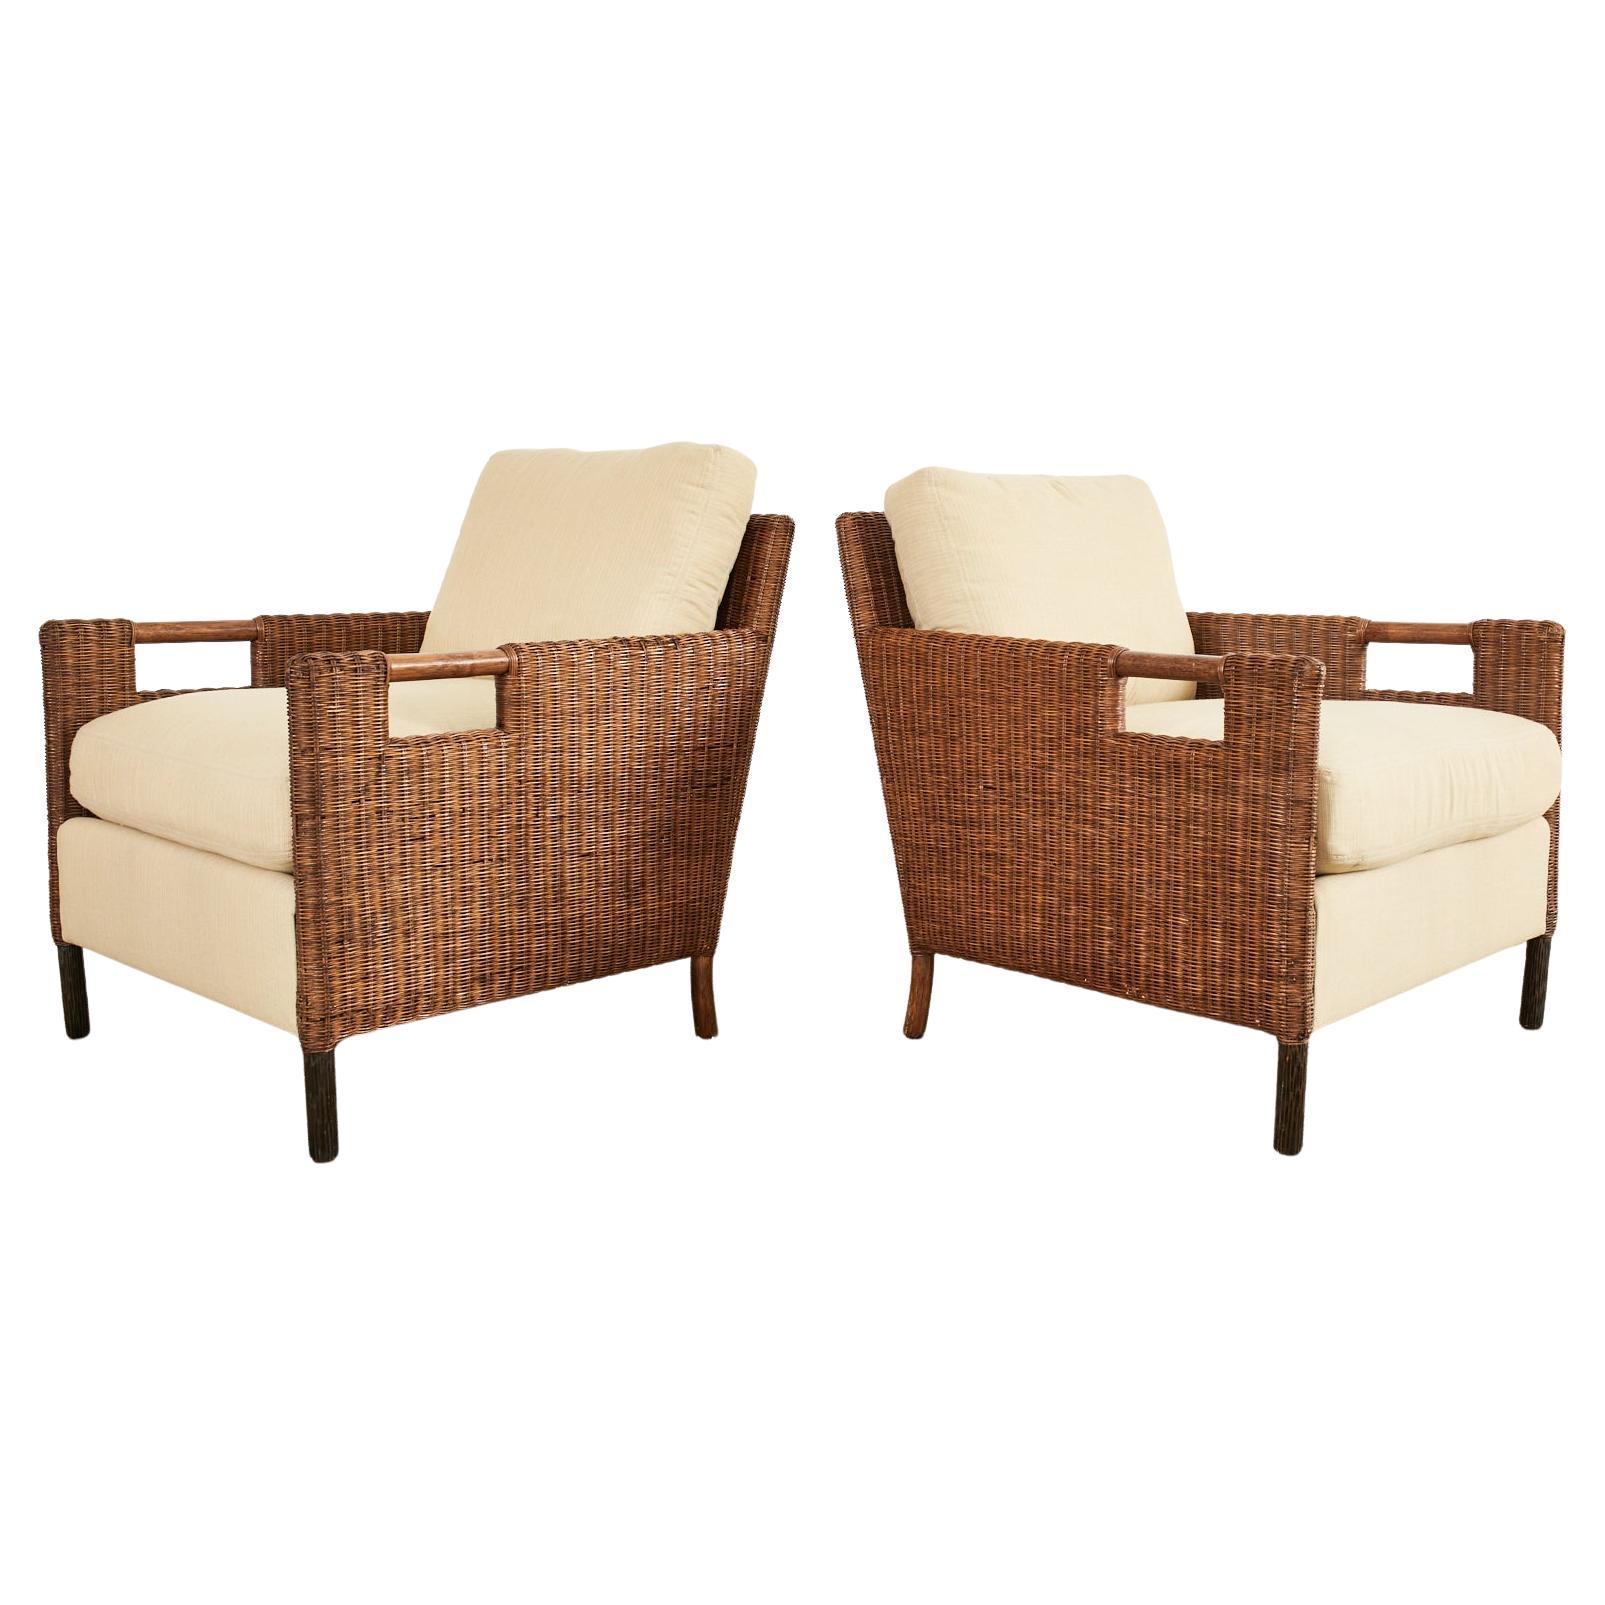 Pair of McGuire Woven Rattan Wicker Lounge Armchairs